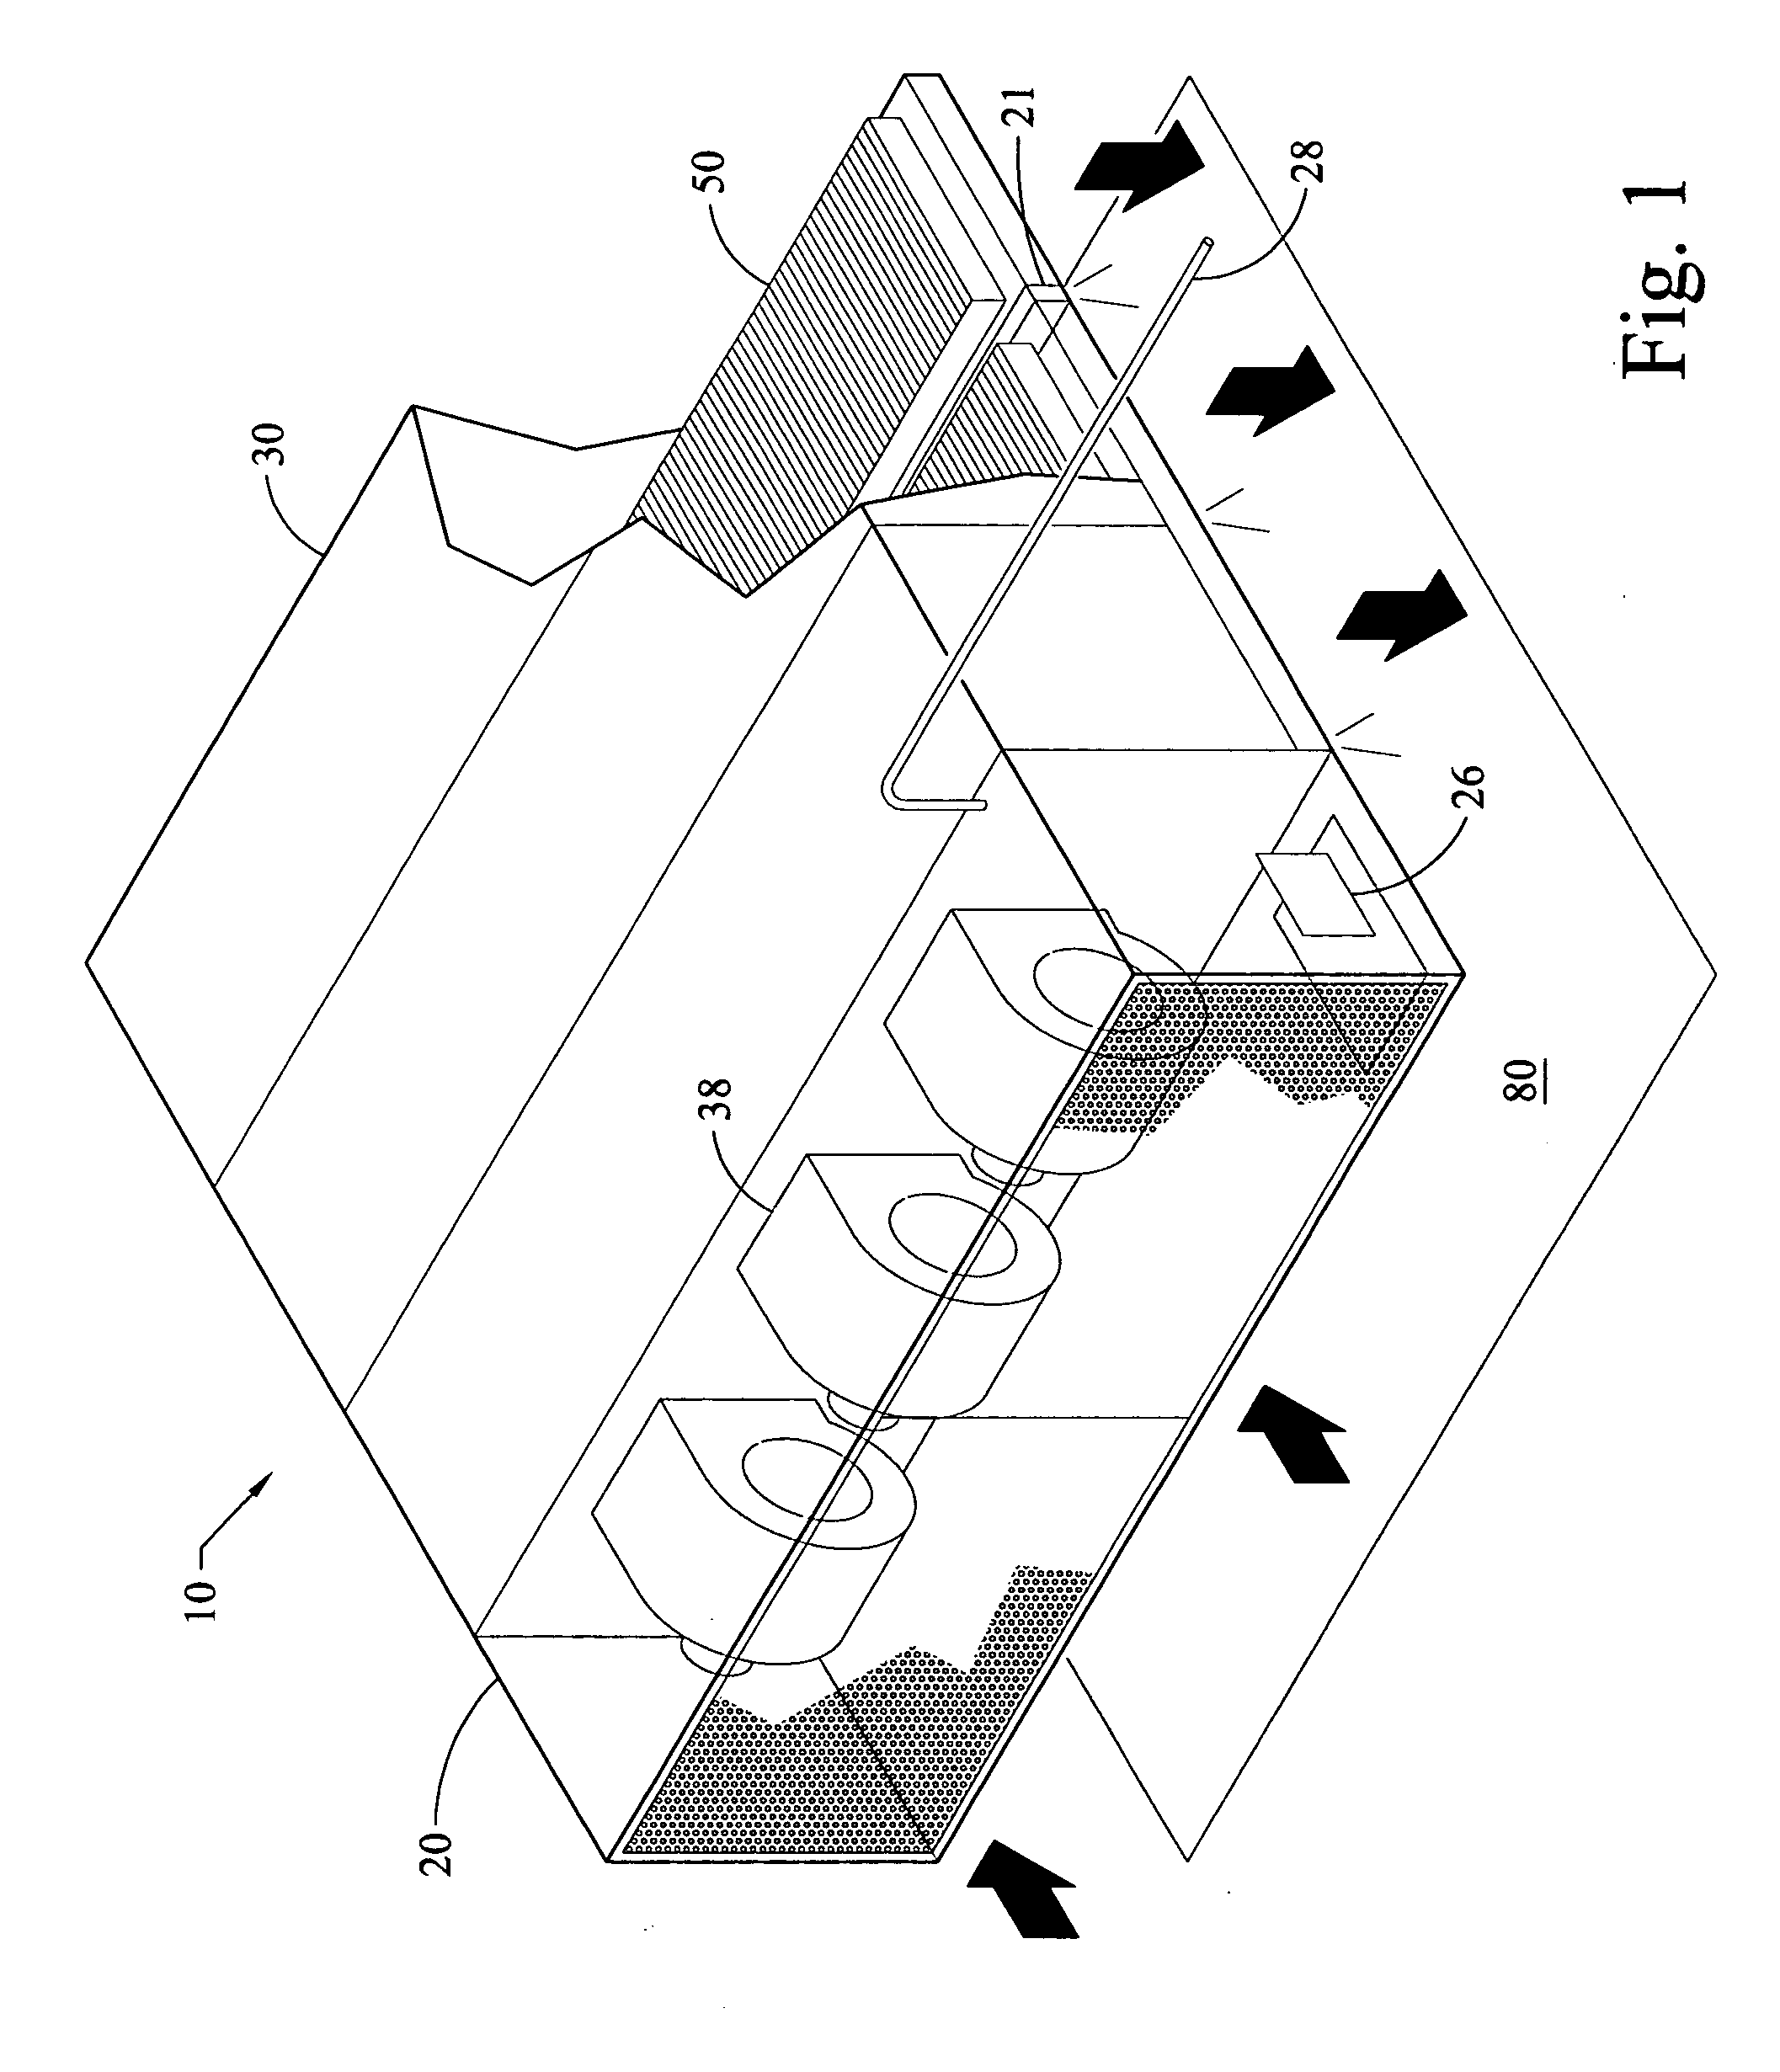 System for providing and managing a laminar flow of clean air